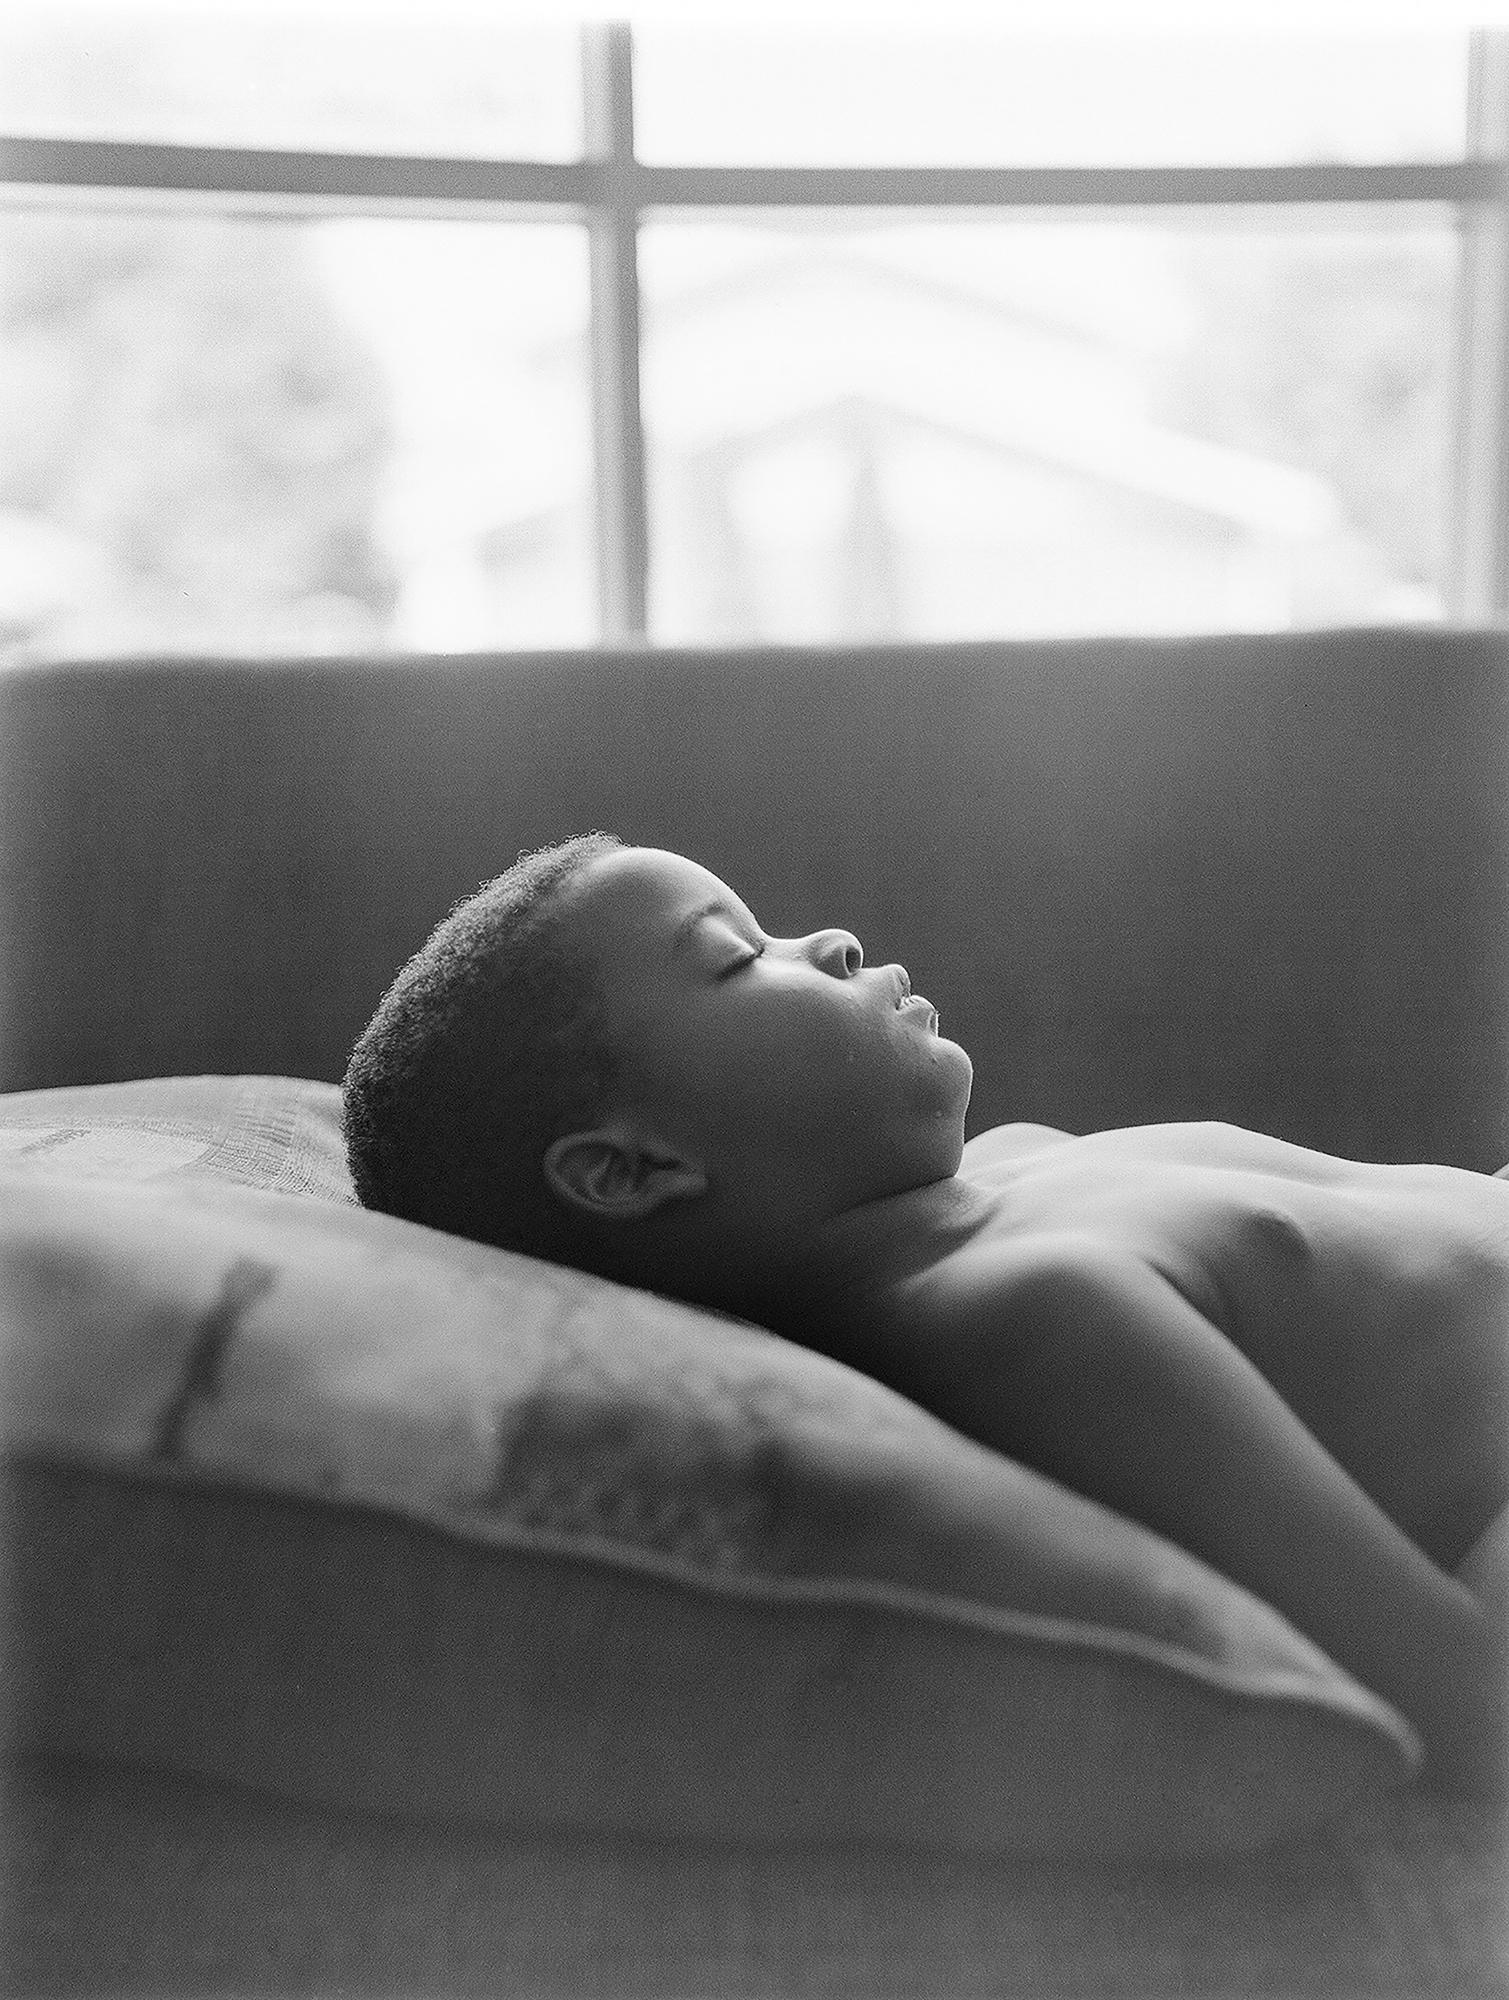 Visura: Rashod Taylor on Documenting the Intimate Realities of Family, Legacy, and the Lens